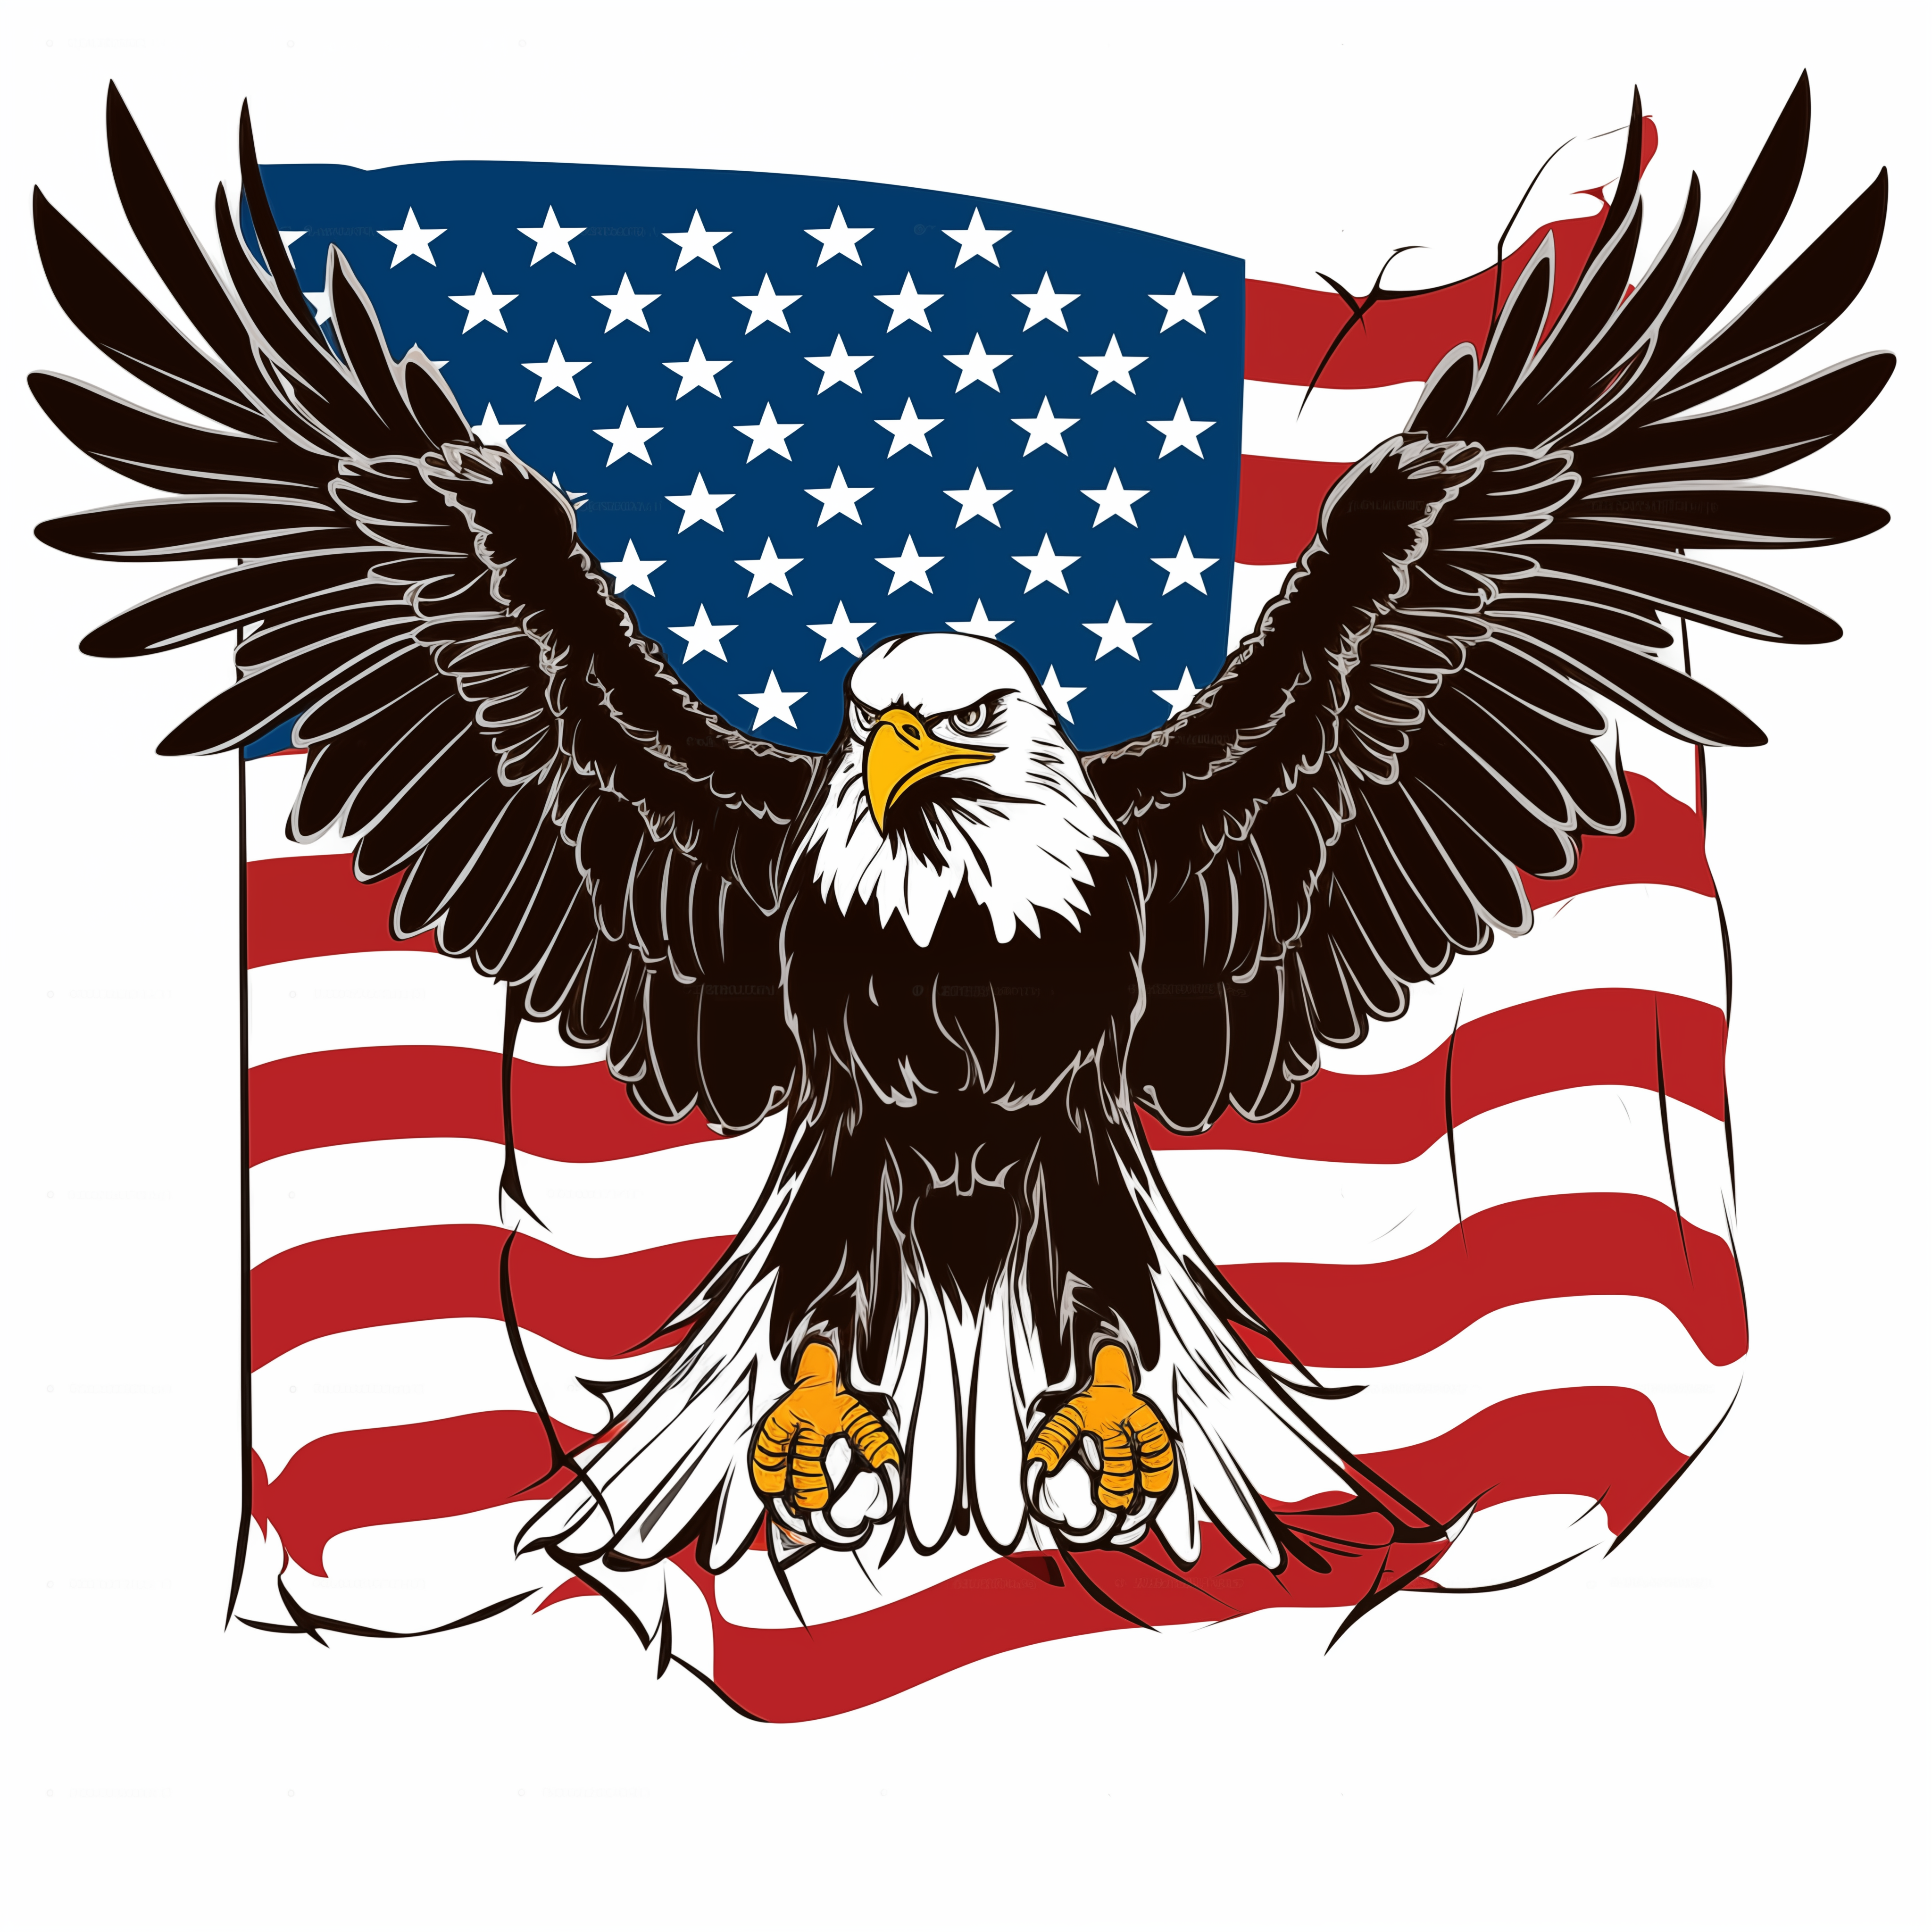 srp3_a_bald_eagle_with_spread_wings_over_an_American_flag_vecto_f49f7992-9989-4fb0-9343-0c642b...png